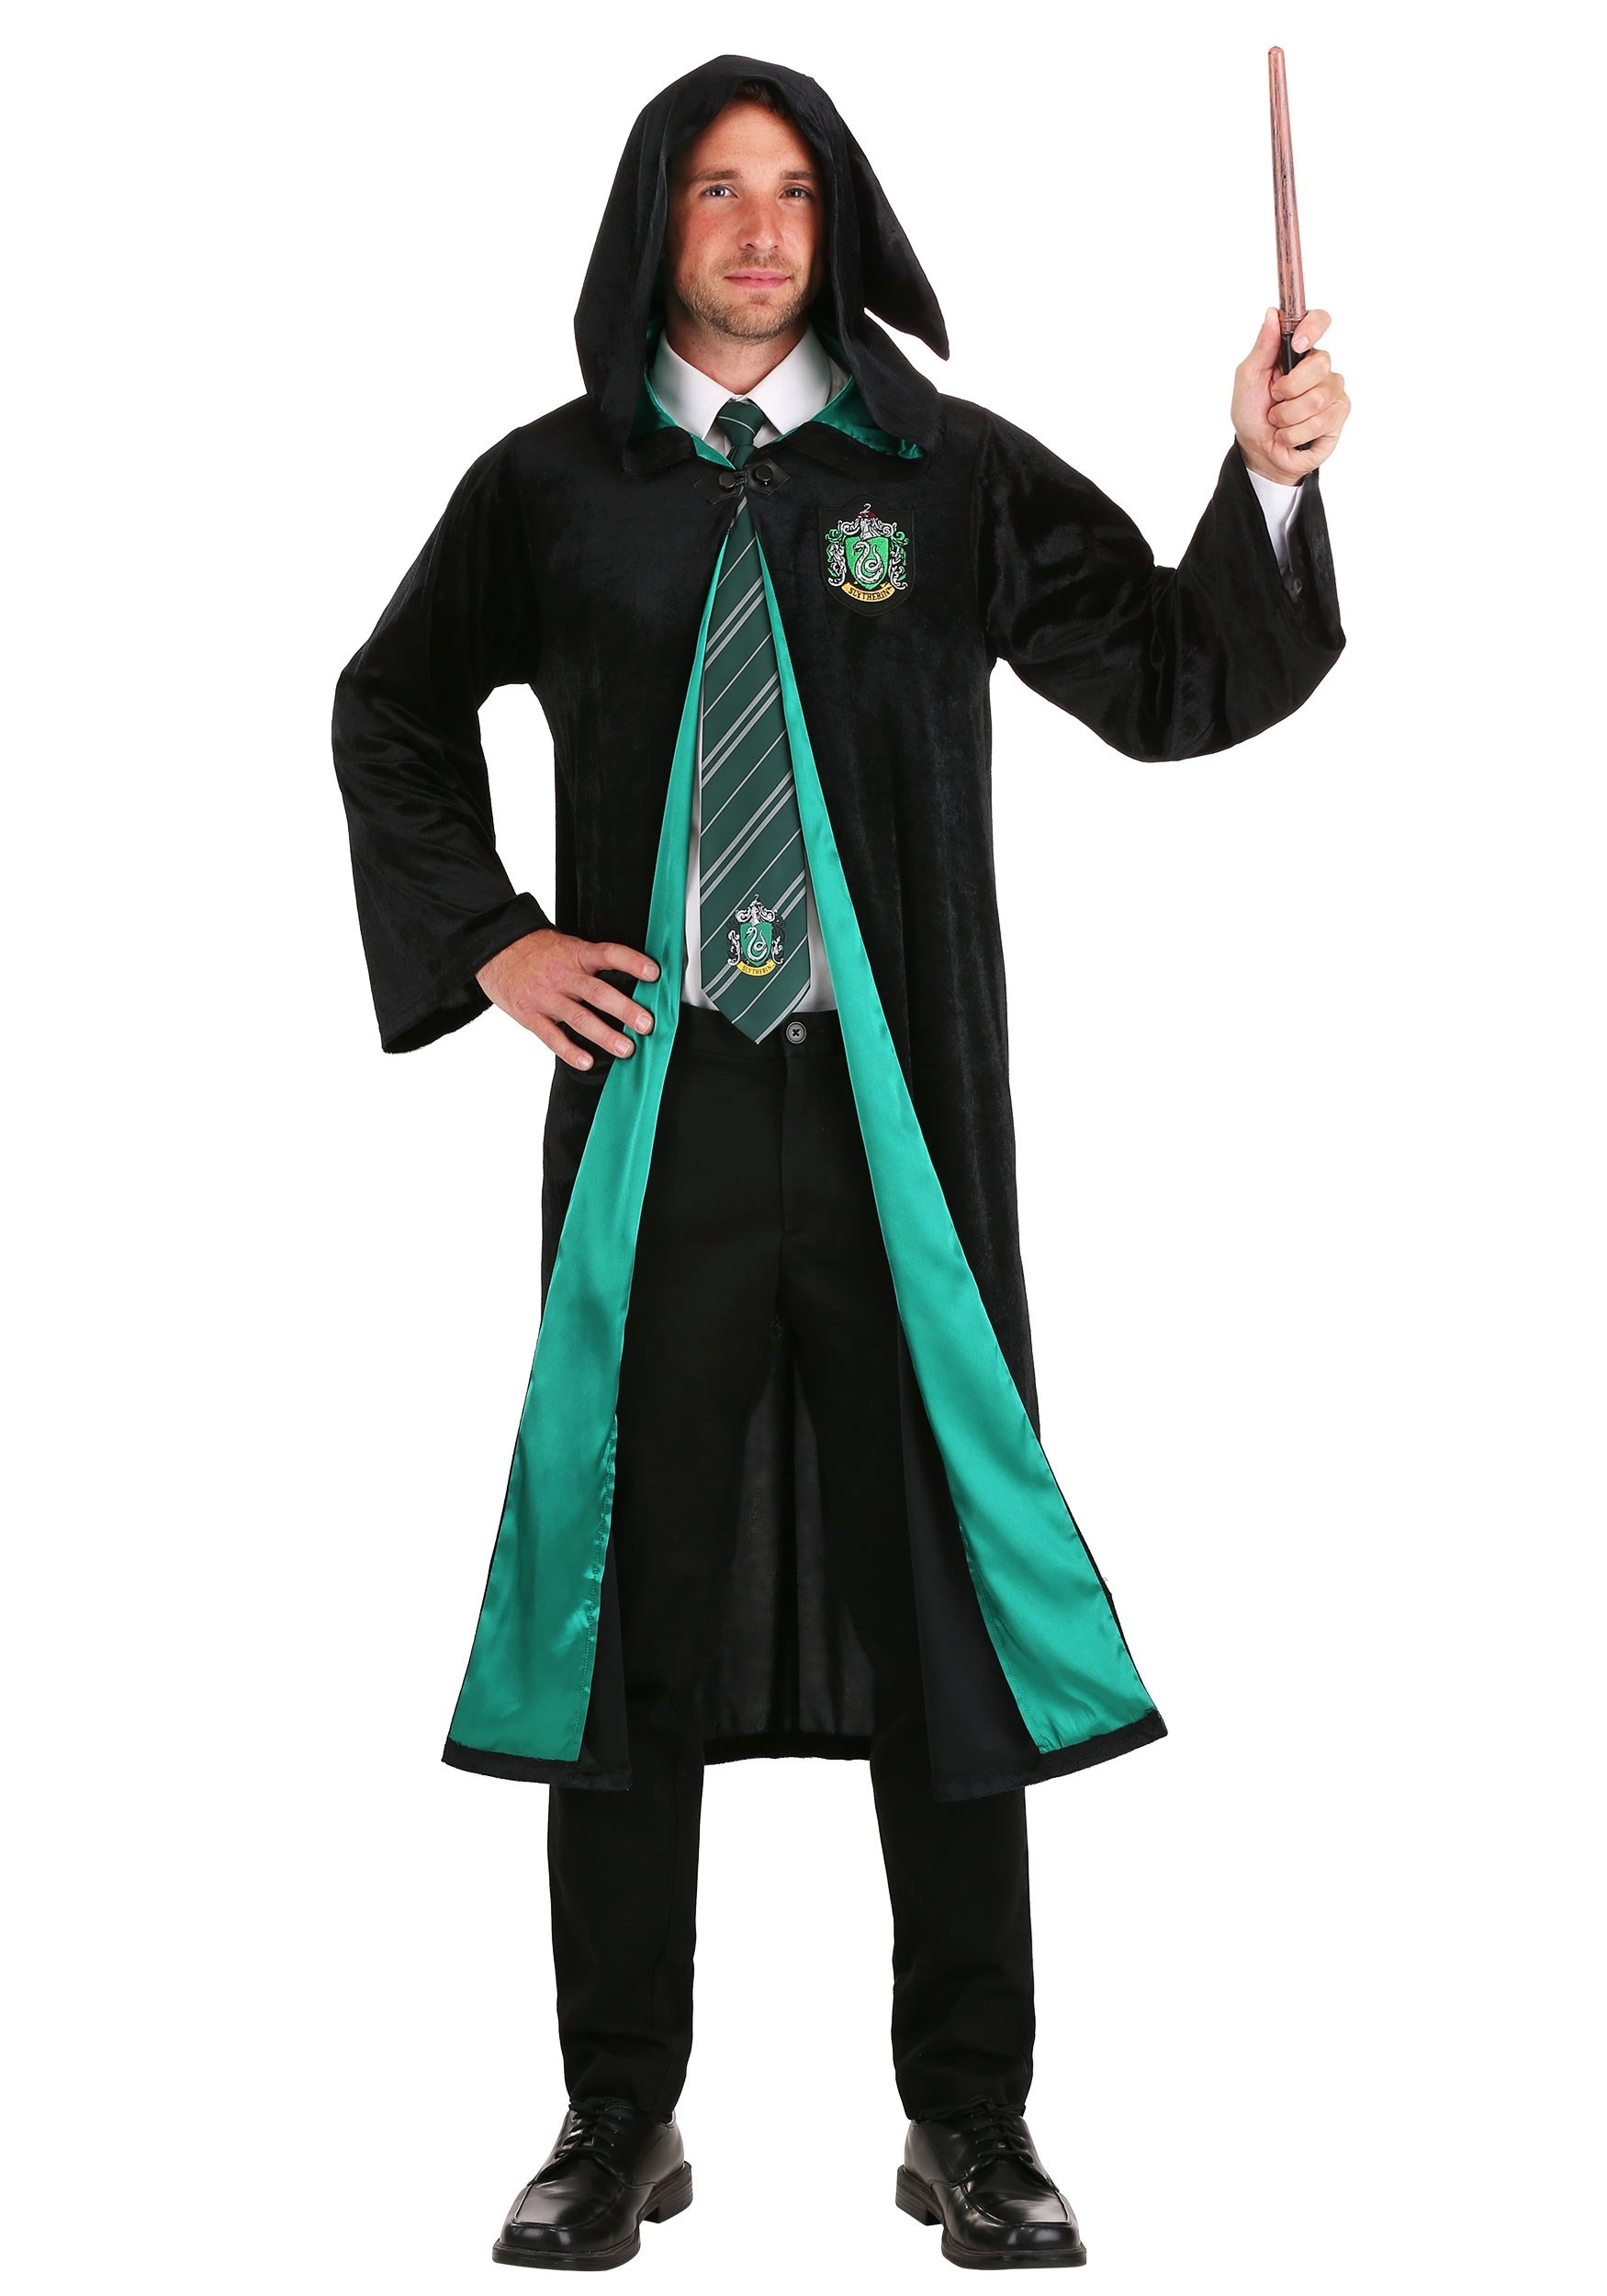 Slytherin Robe Adult  Harry Potter Clothing from House of Spells